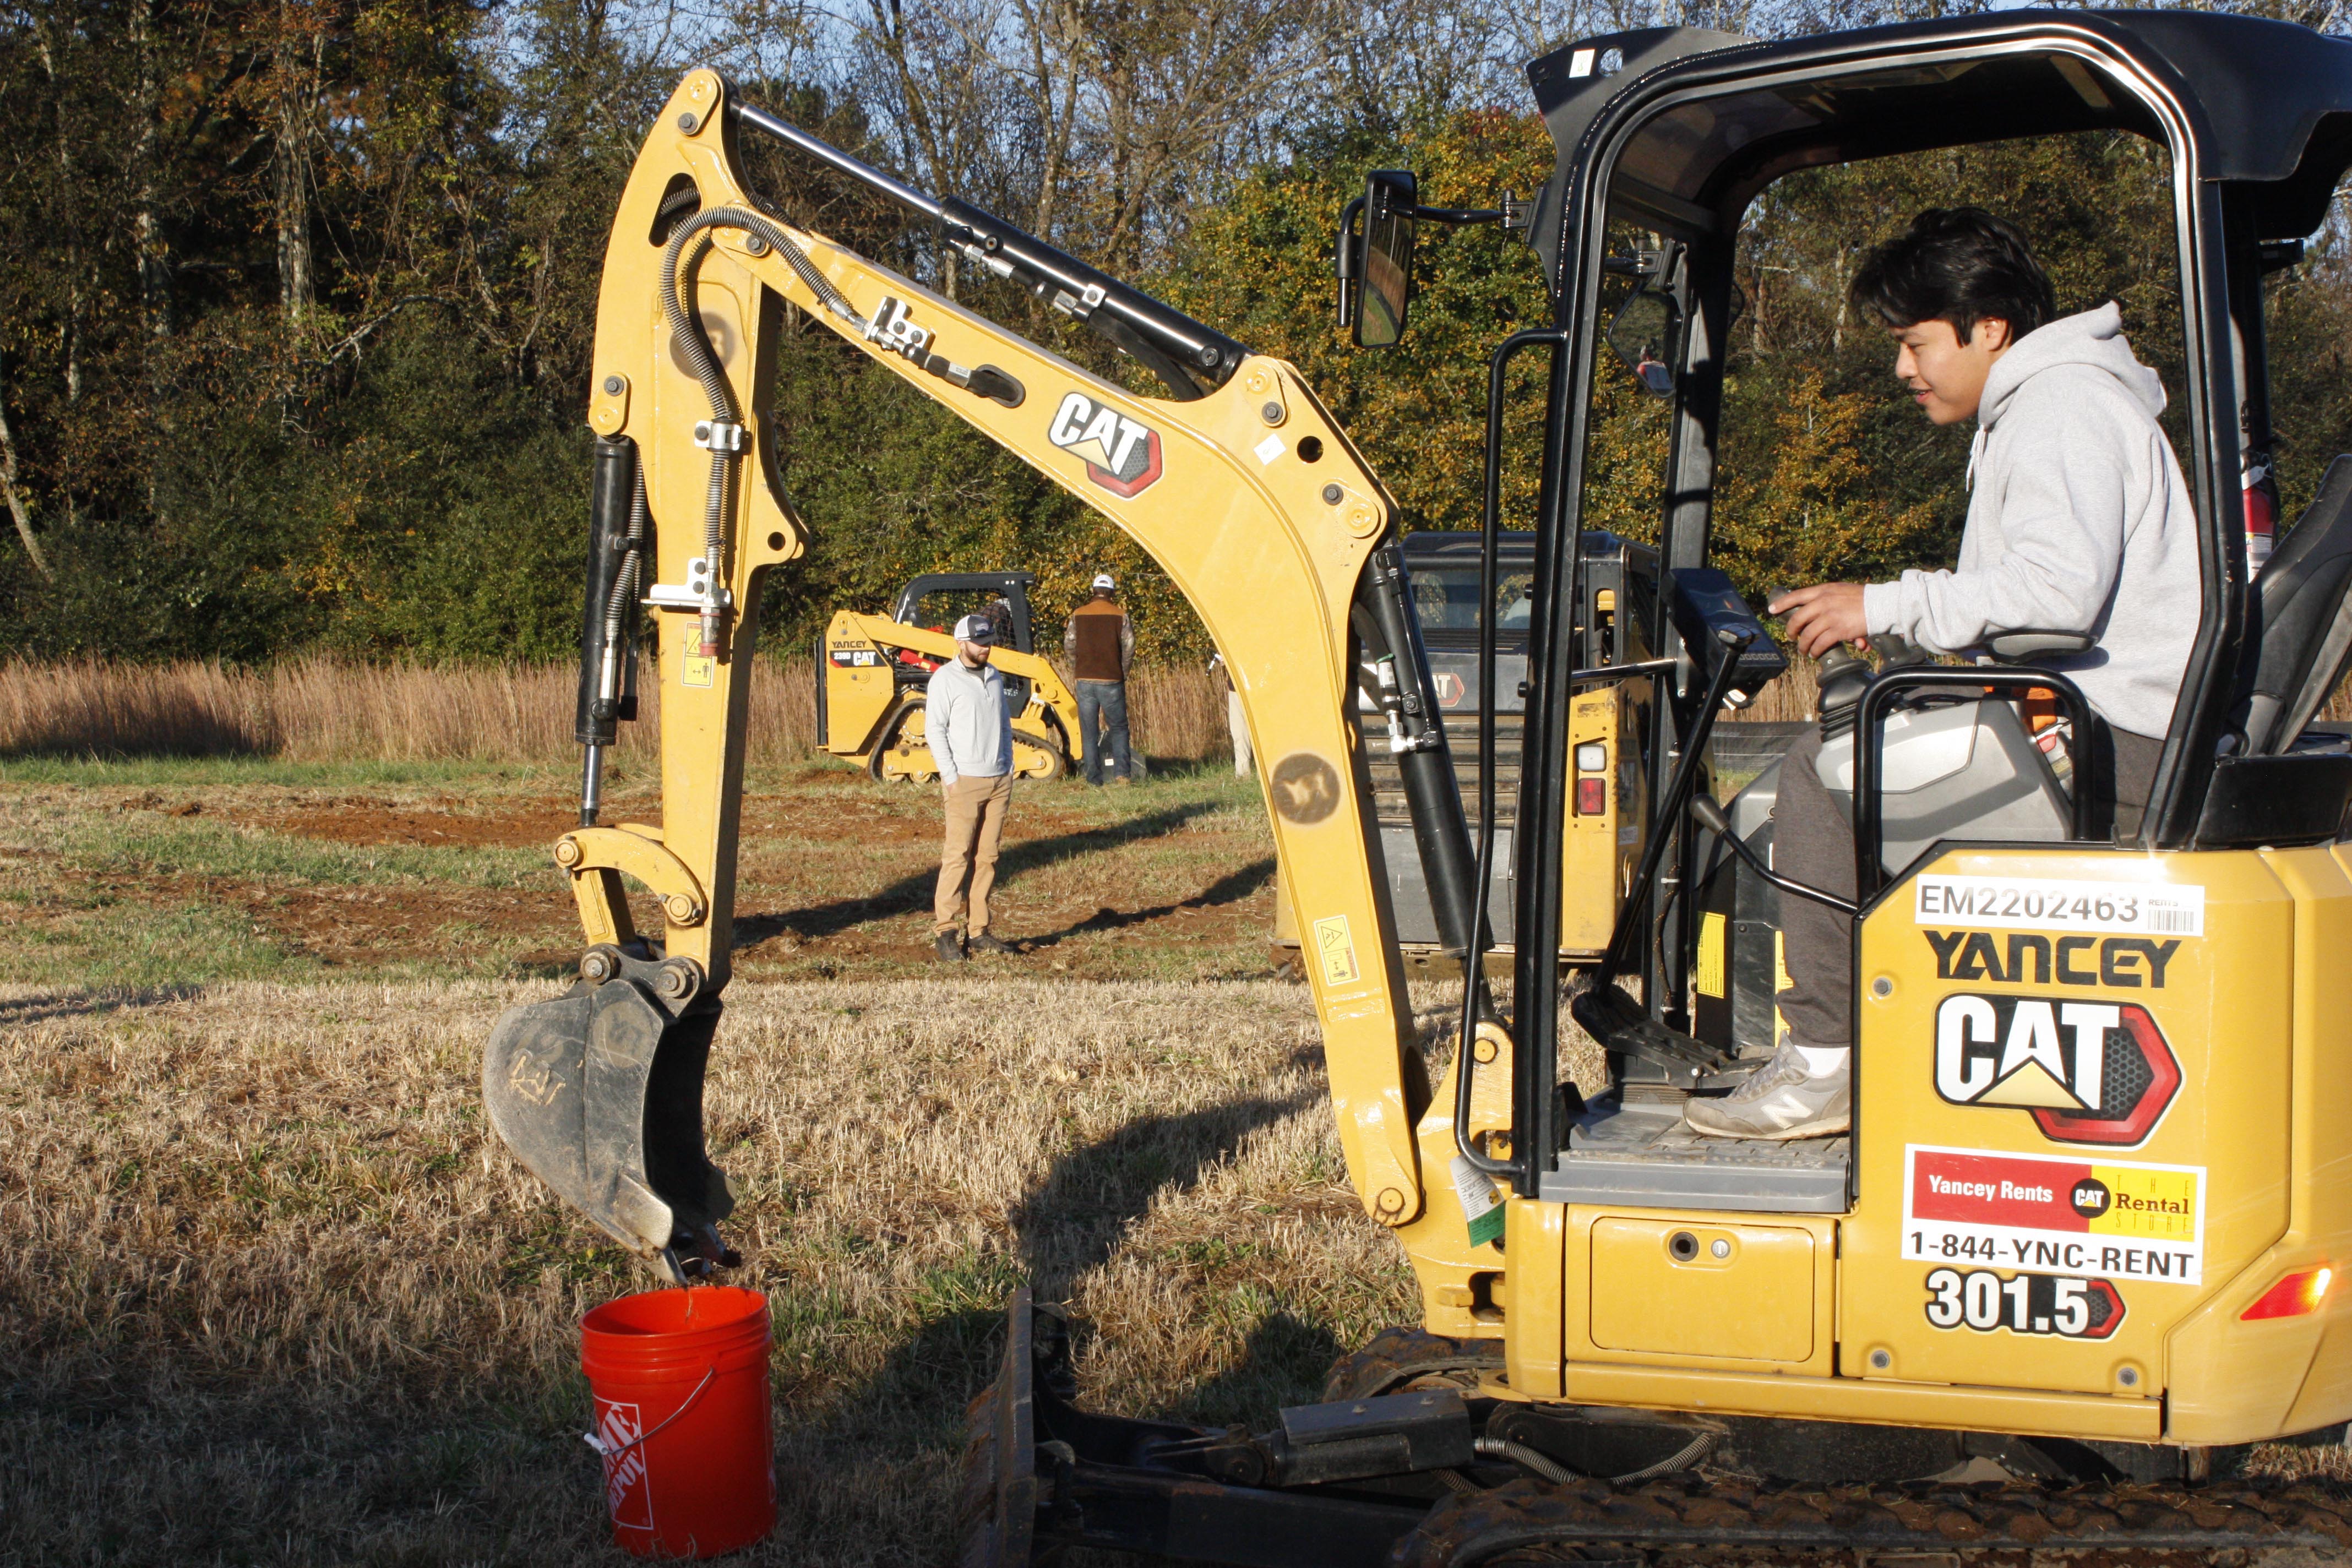 GNTC student Alfredo Perez manipulates the bucket of a mini-excavator to scoop up a small ball and drop it into a bucket in a timed competition.